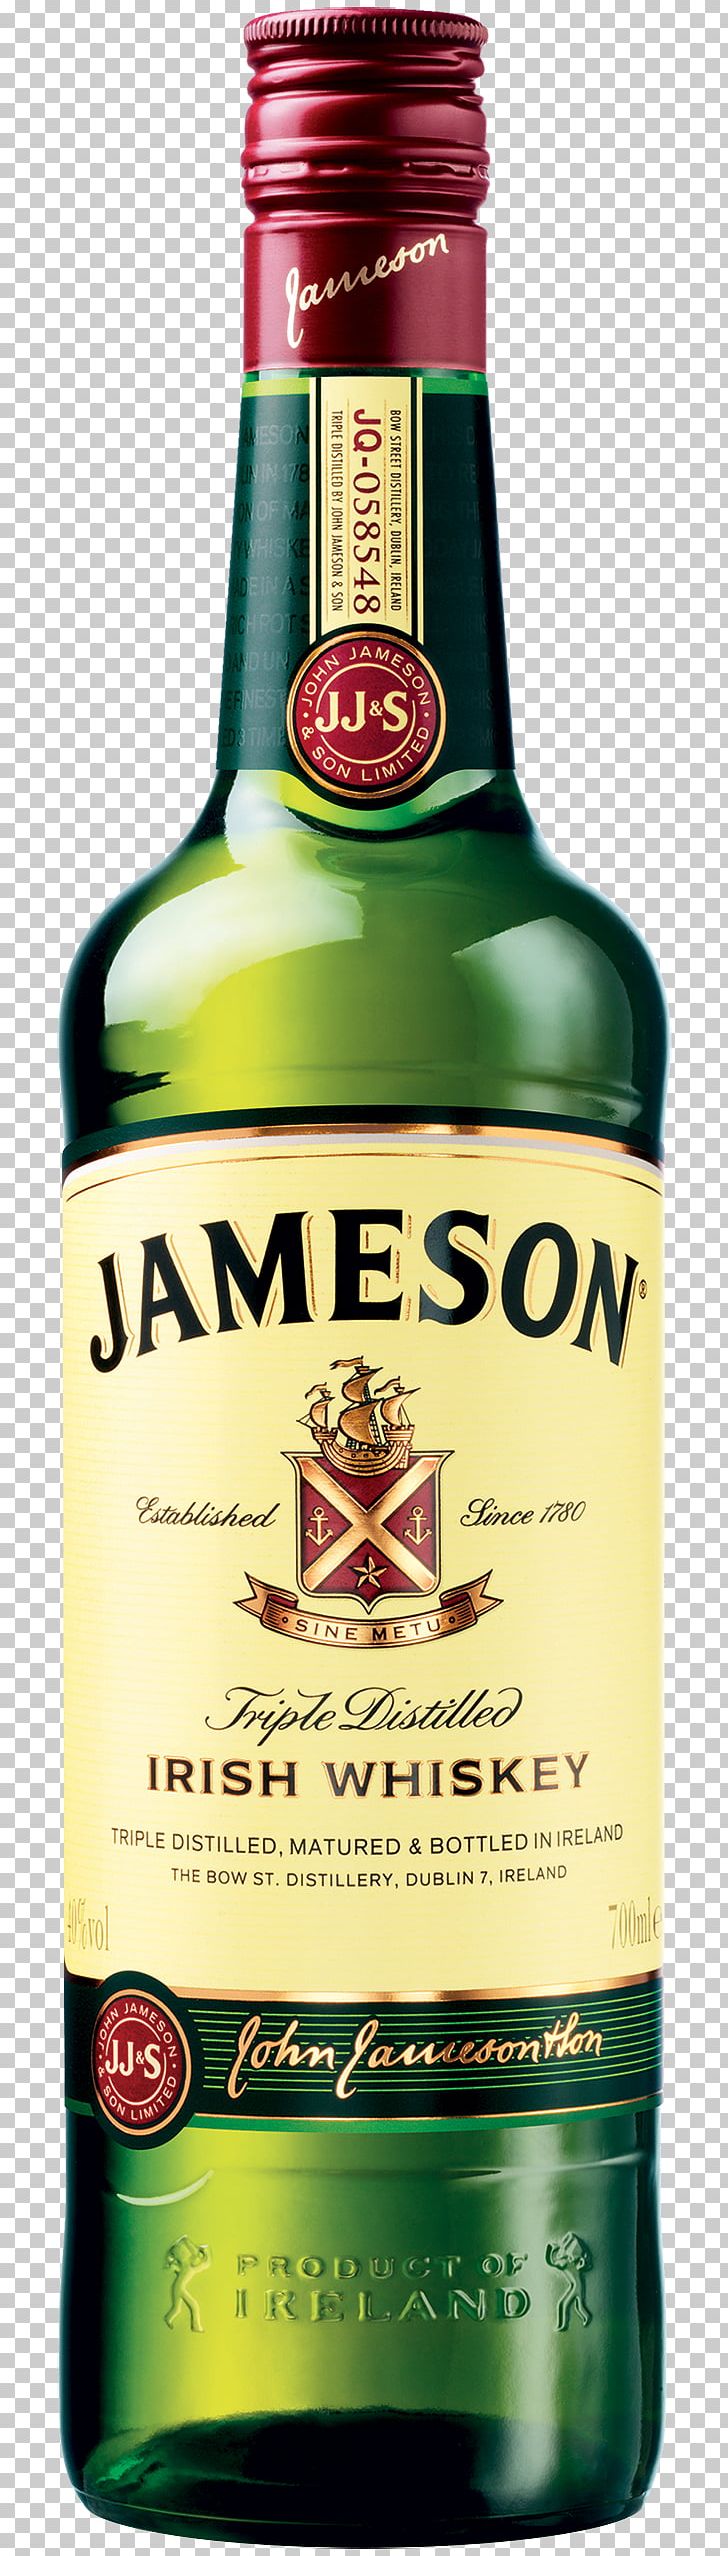 Jameson Irish Whiskey Grain Whisky New Midleton Distillery PNG, Clipart, Alcoholic Beverage, Blended Whiskey, Bottle, Distillation, Distilled Beverage Free PNG Download